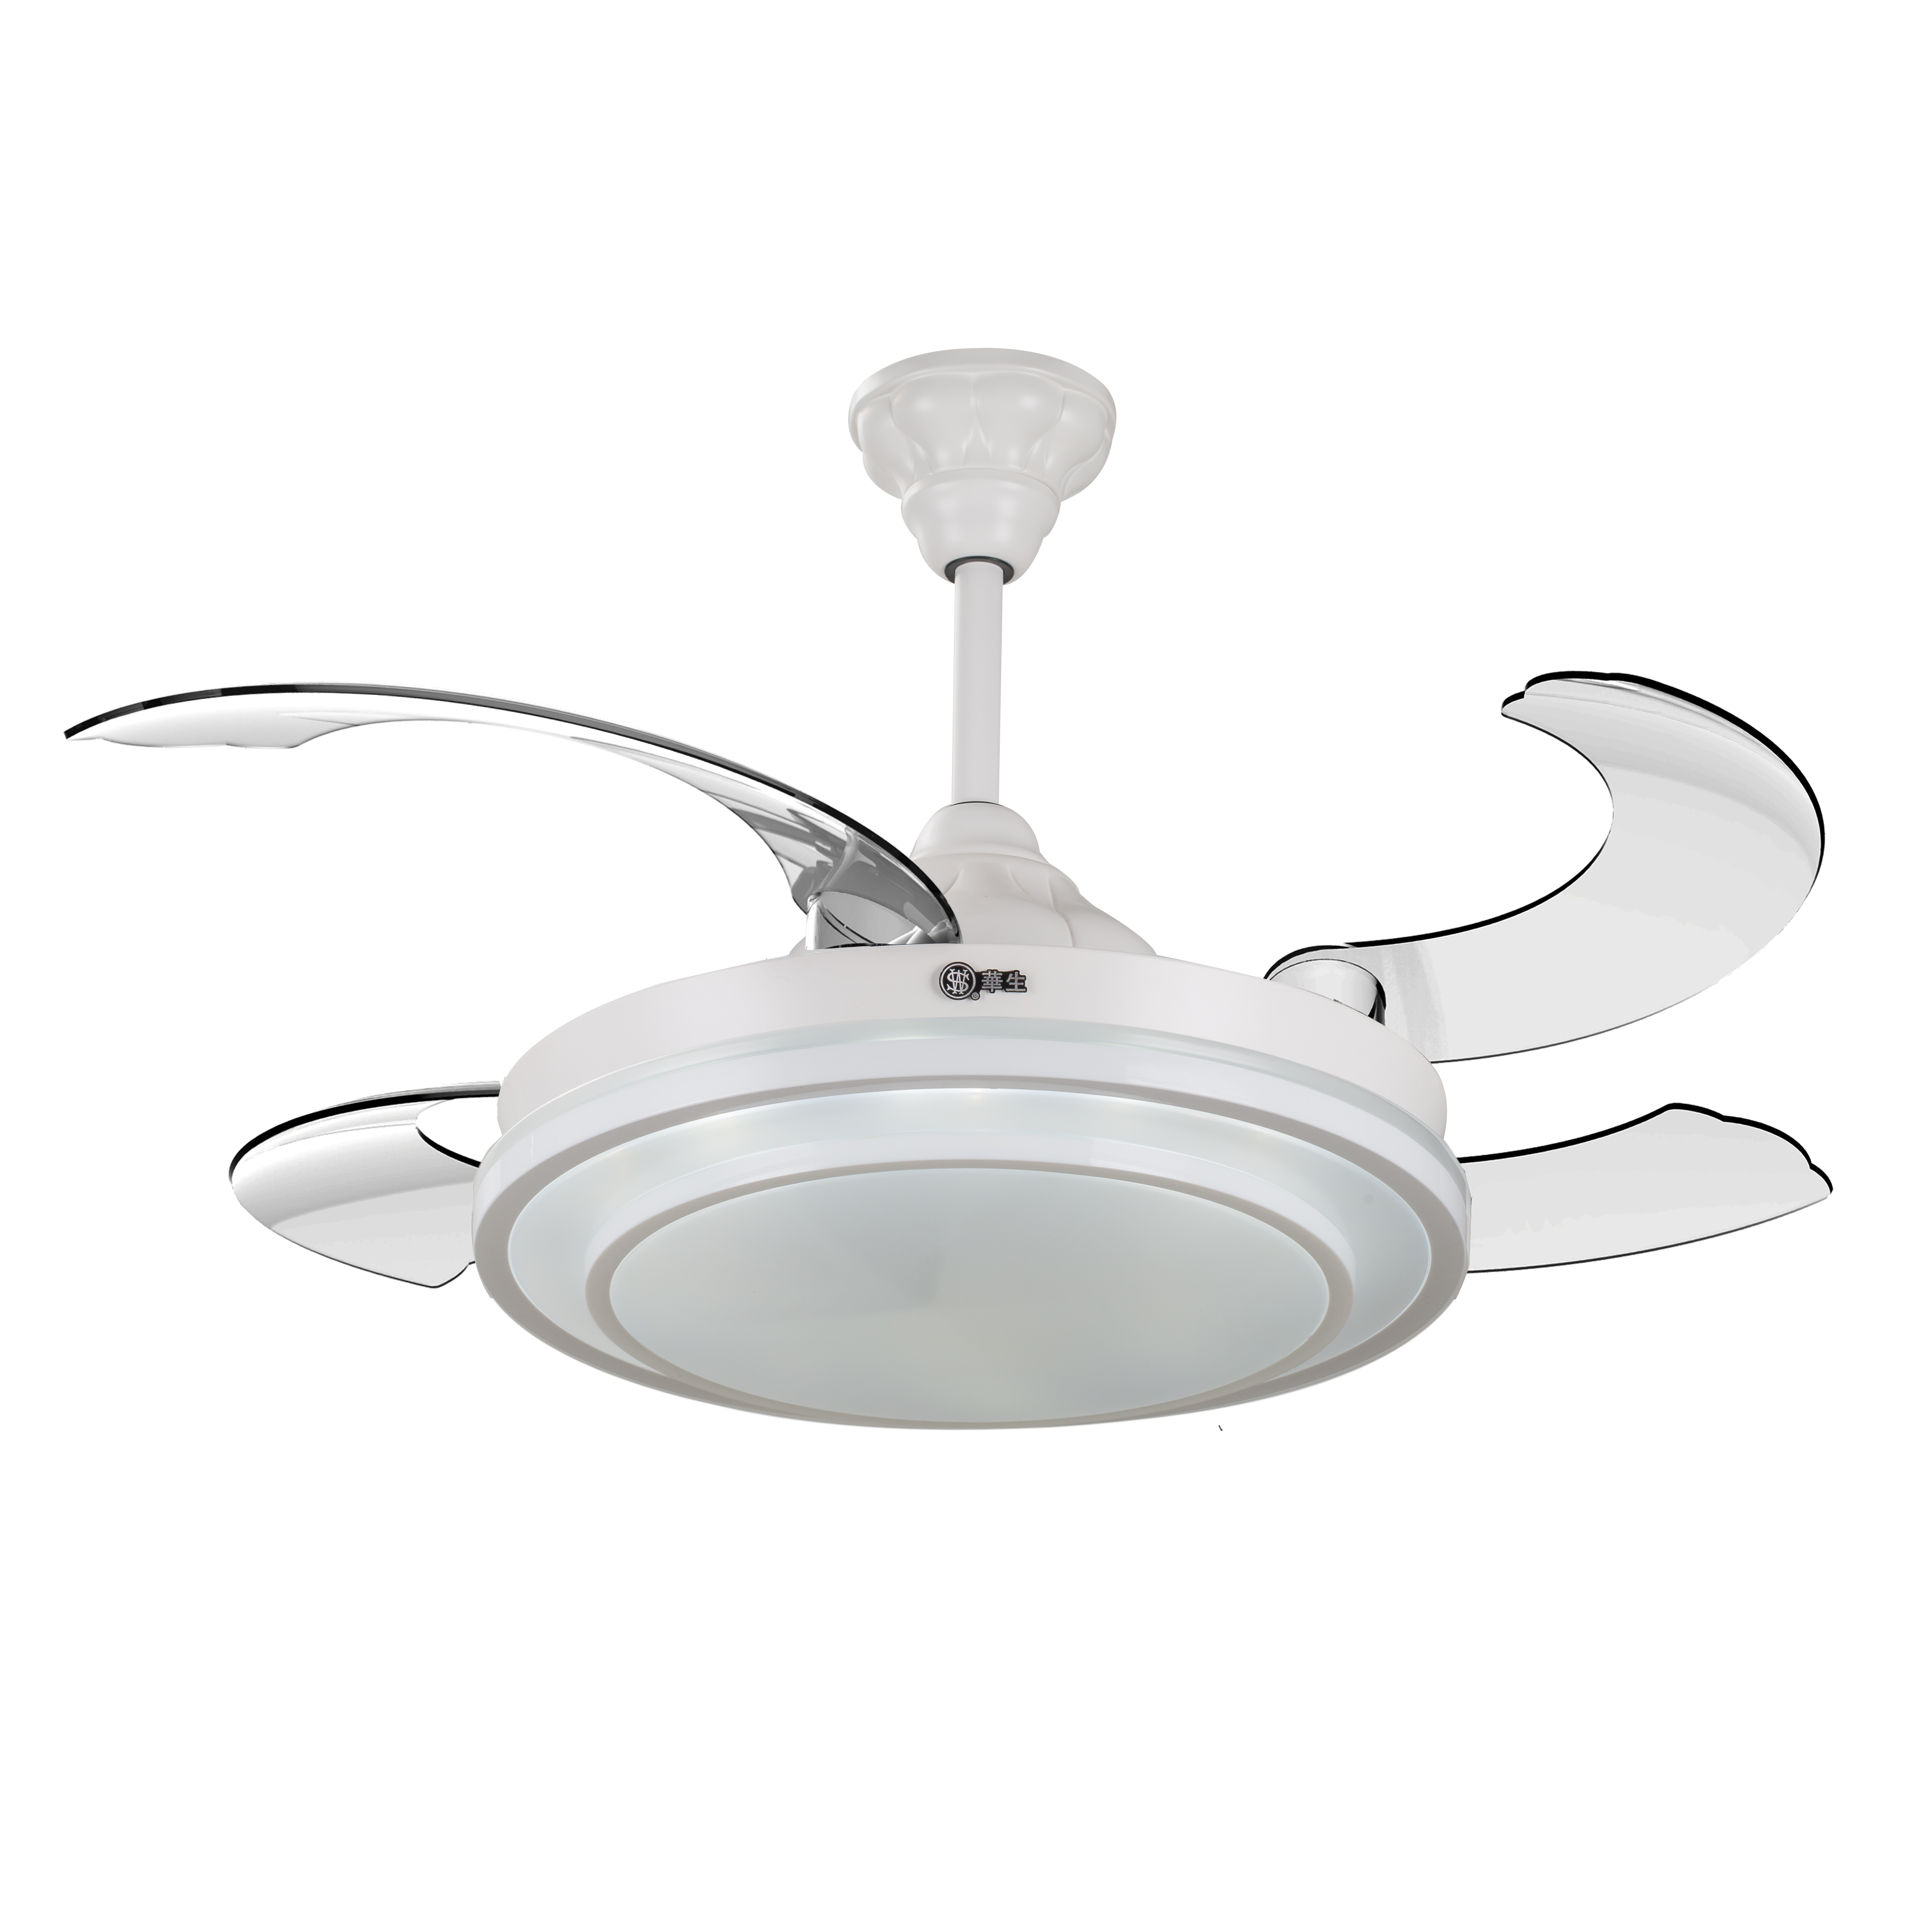 H42-609 invisible fan lamp